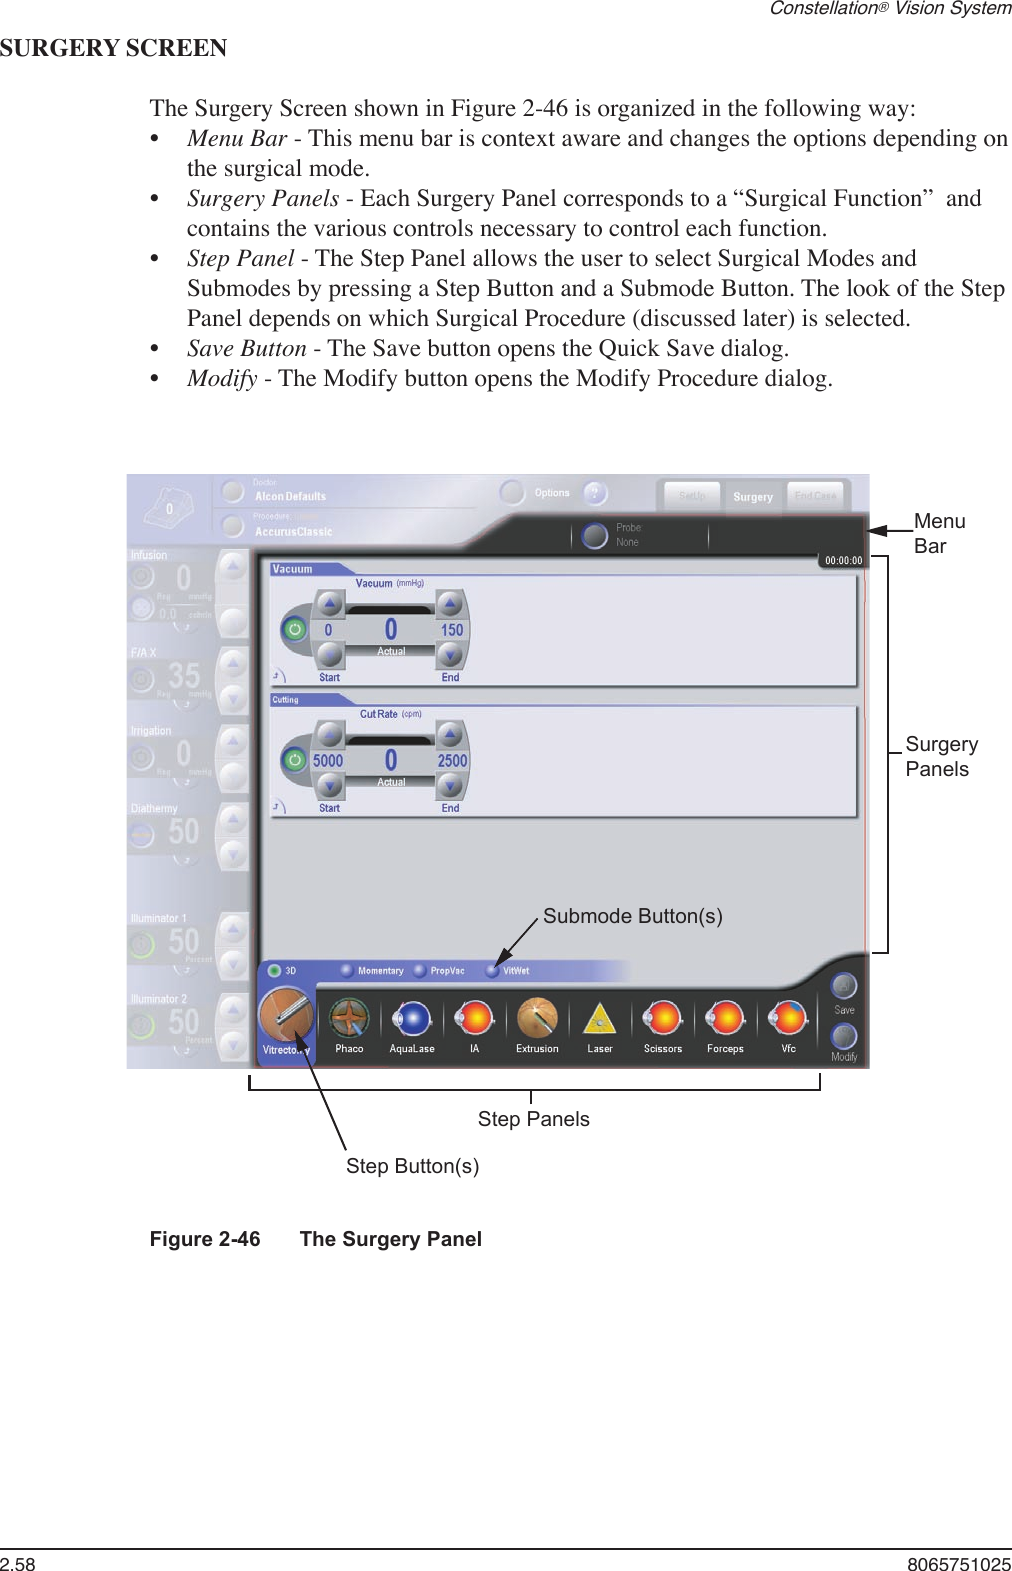 2.58  8065751025Constellation® Vision SystemSURGERY SCREENThe Surgery Screen shown in Figure 2-46 is organized in the following way:Menu Bar - This menu bar is context aware and changes the options depending on the surgical mode. Surgery Panels - Each Surgery Panel corresponds to a “Surgical Function”  and contains the various controls necessary to control each function.Step Panel - The Step Panel allows the user to select Surgical Modes and Submodes by pressing a Step Button and a Submode Button. The look of the Step Panel depends on which Surgical Procedure (discussed later) is selected.Save Button - The Save button opens the Quick Save dialog.  Modify - The Modify button opens the Modify Procedure dialog. •••••MenuBarSurgeryPanelsStep PanelsStep Button(s)Submode Button(s)Figure 2-46  The Surgery Panel